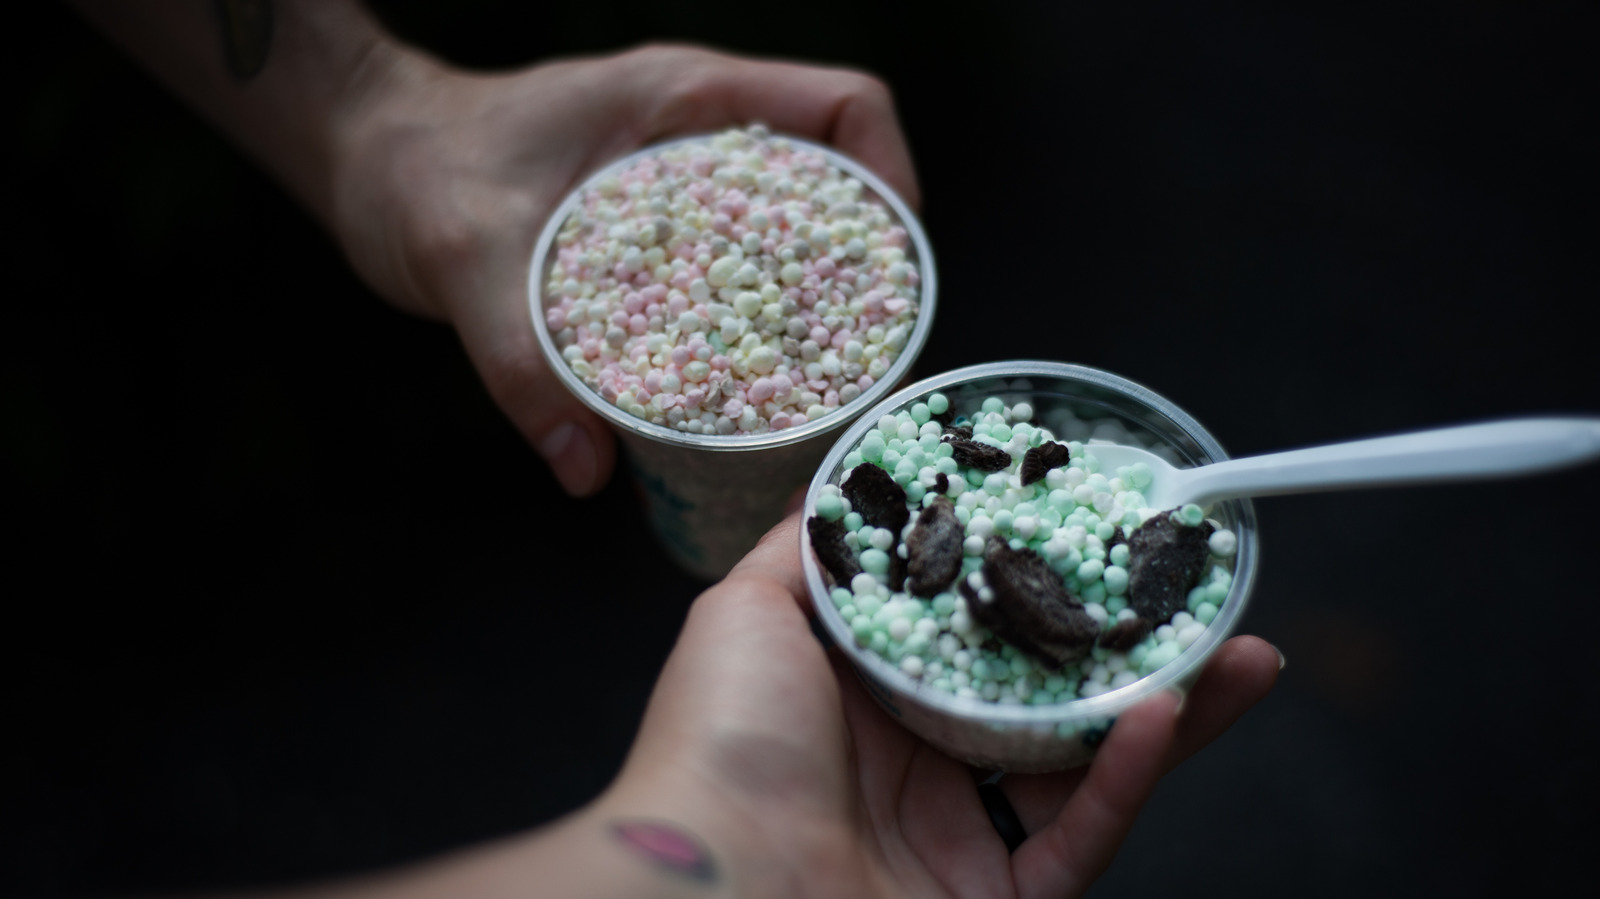 https://www.tastingtable.com/img/gallery/the-quintessentially-80s-invention-of-dippin-dots/l-intro-1682715268.jpg